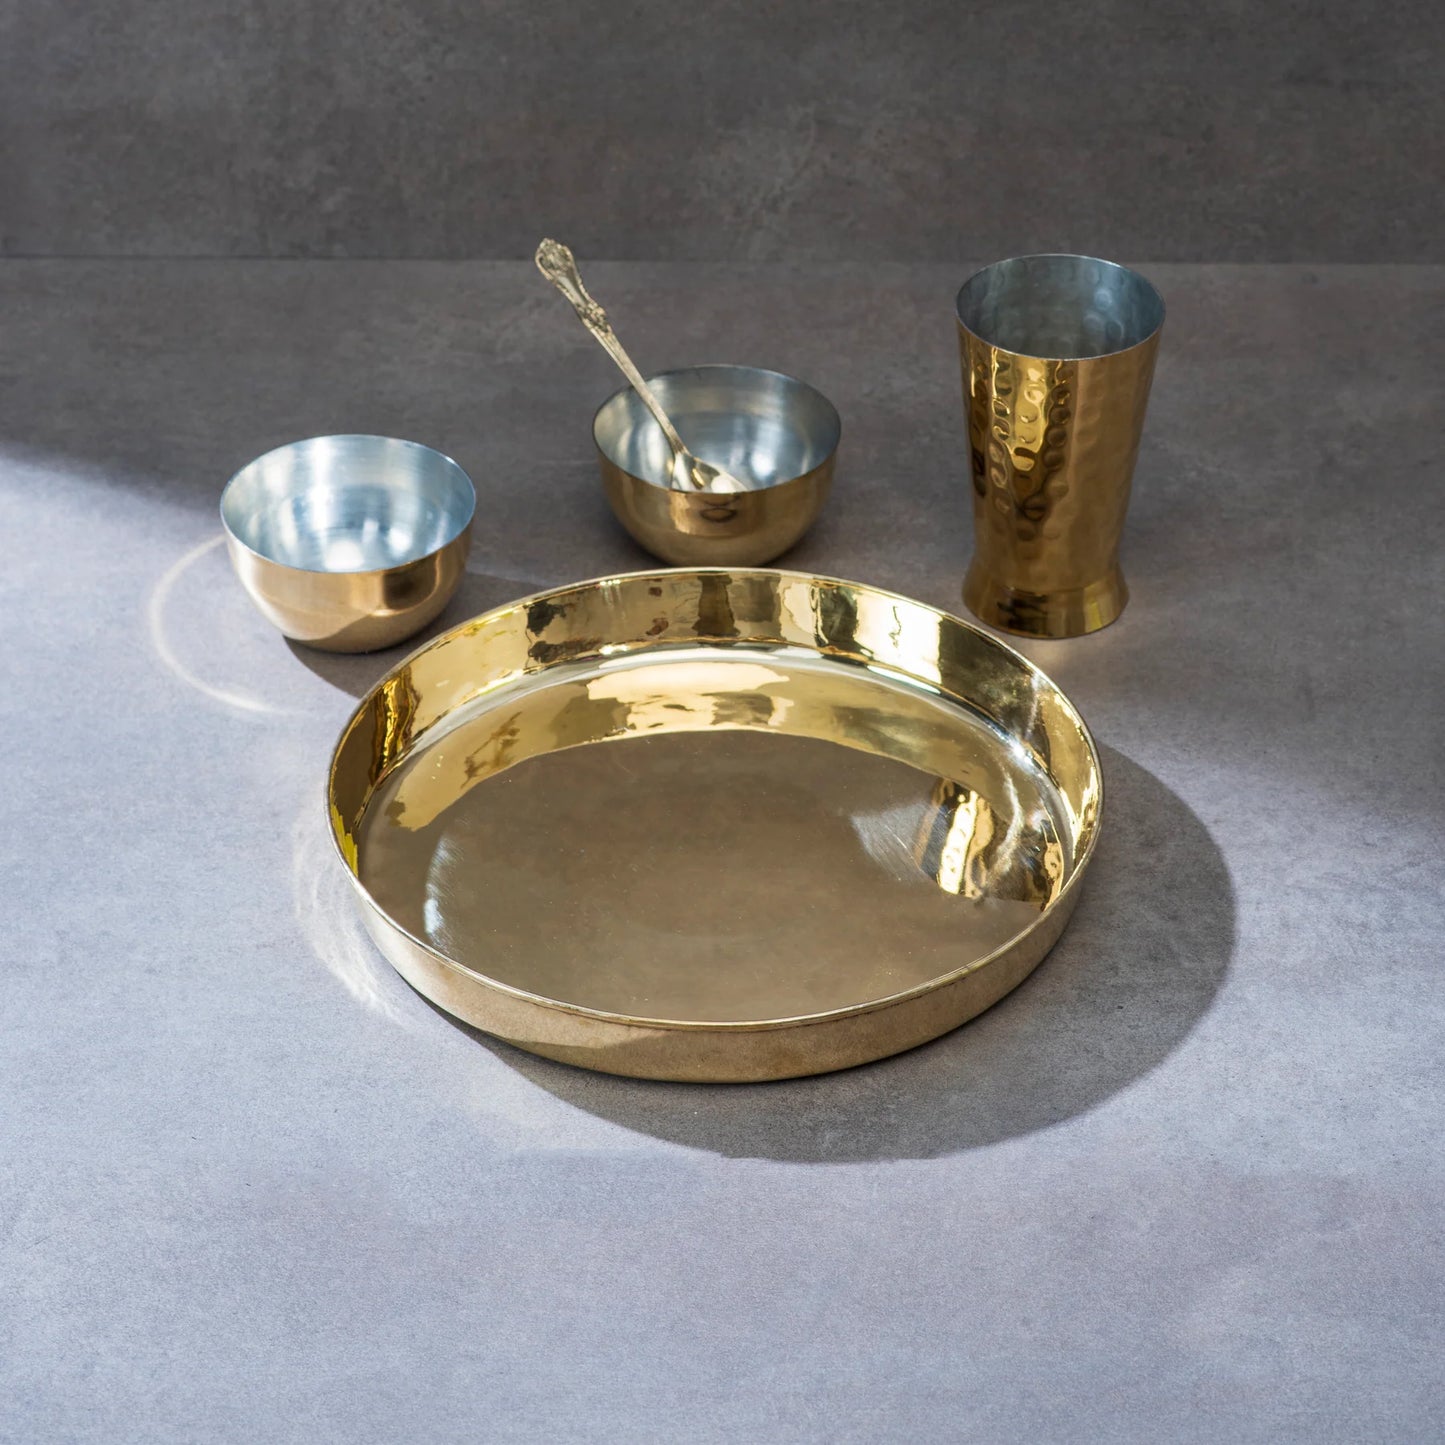 Brass Thaali Set 5 pieces set 1 Thaali, 2 bowls, 1 glass and 1 spoon | Brass eating plate